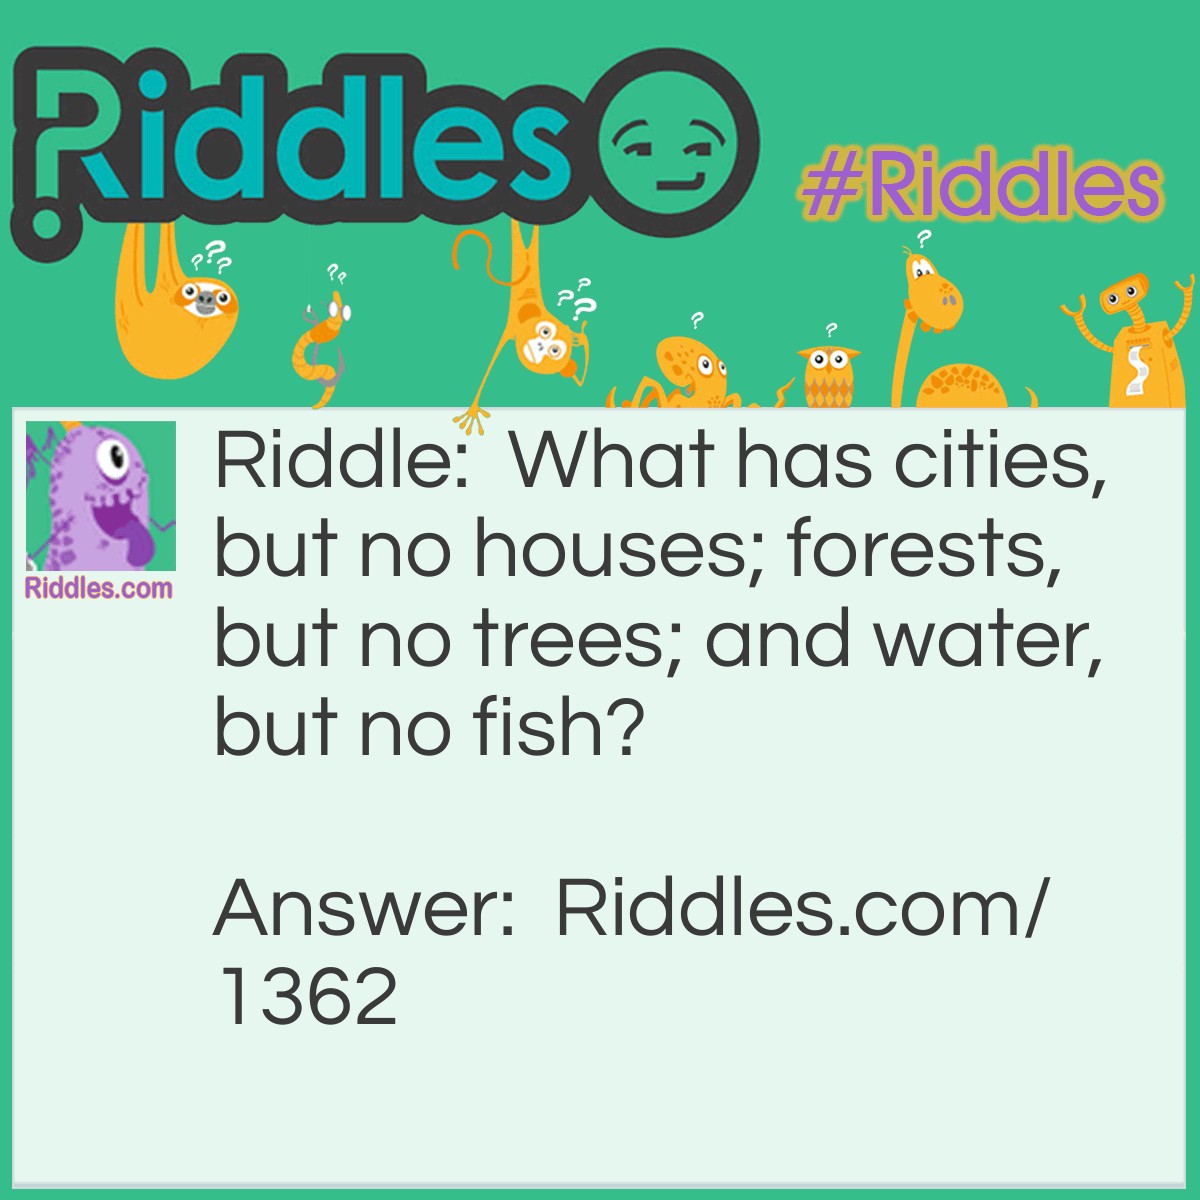 Riddle: What has cities, but no houses; forests, but no trees; and water, but no fish? Answer: A map.